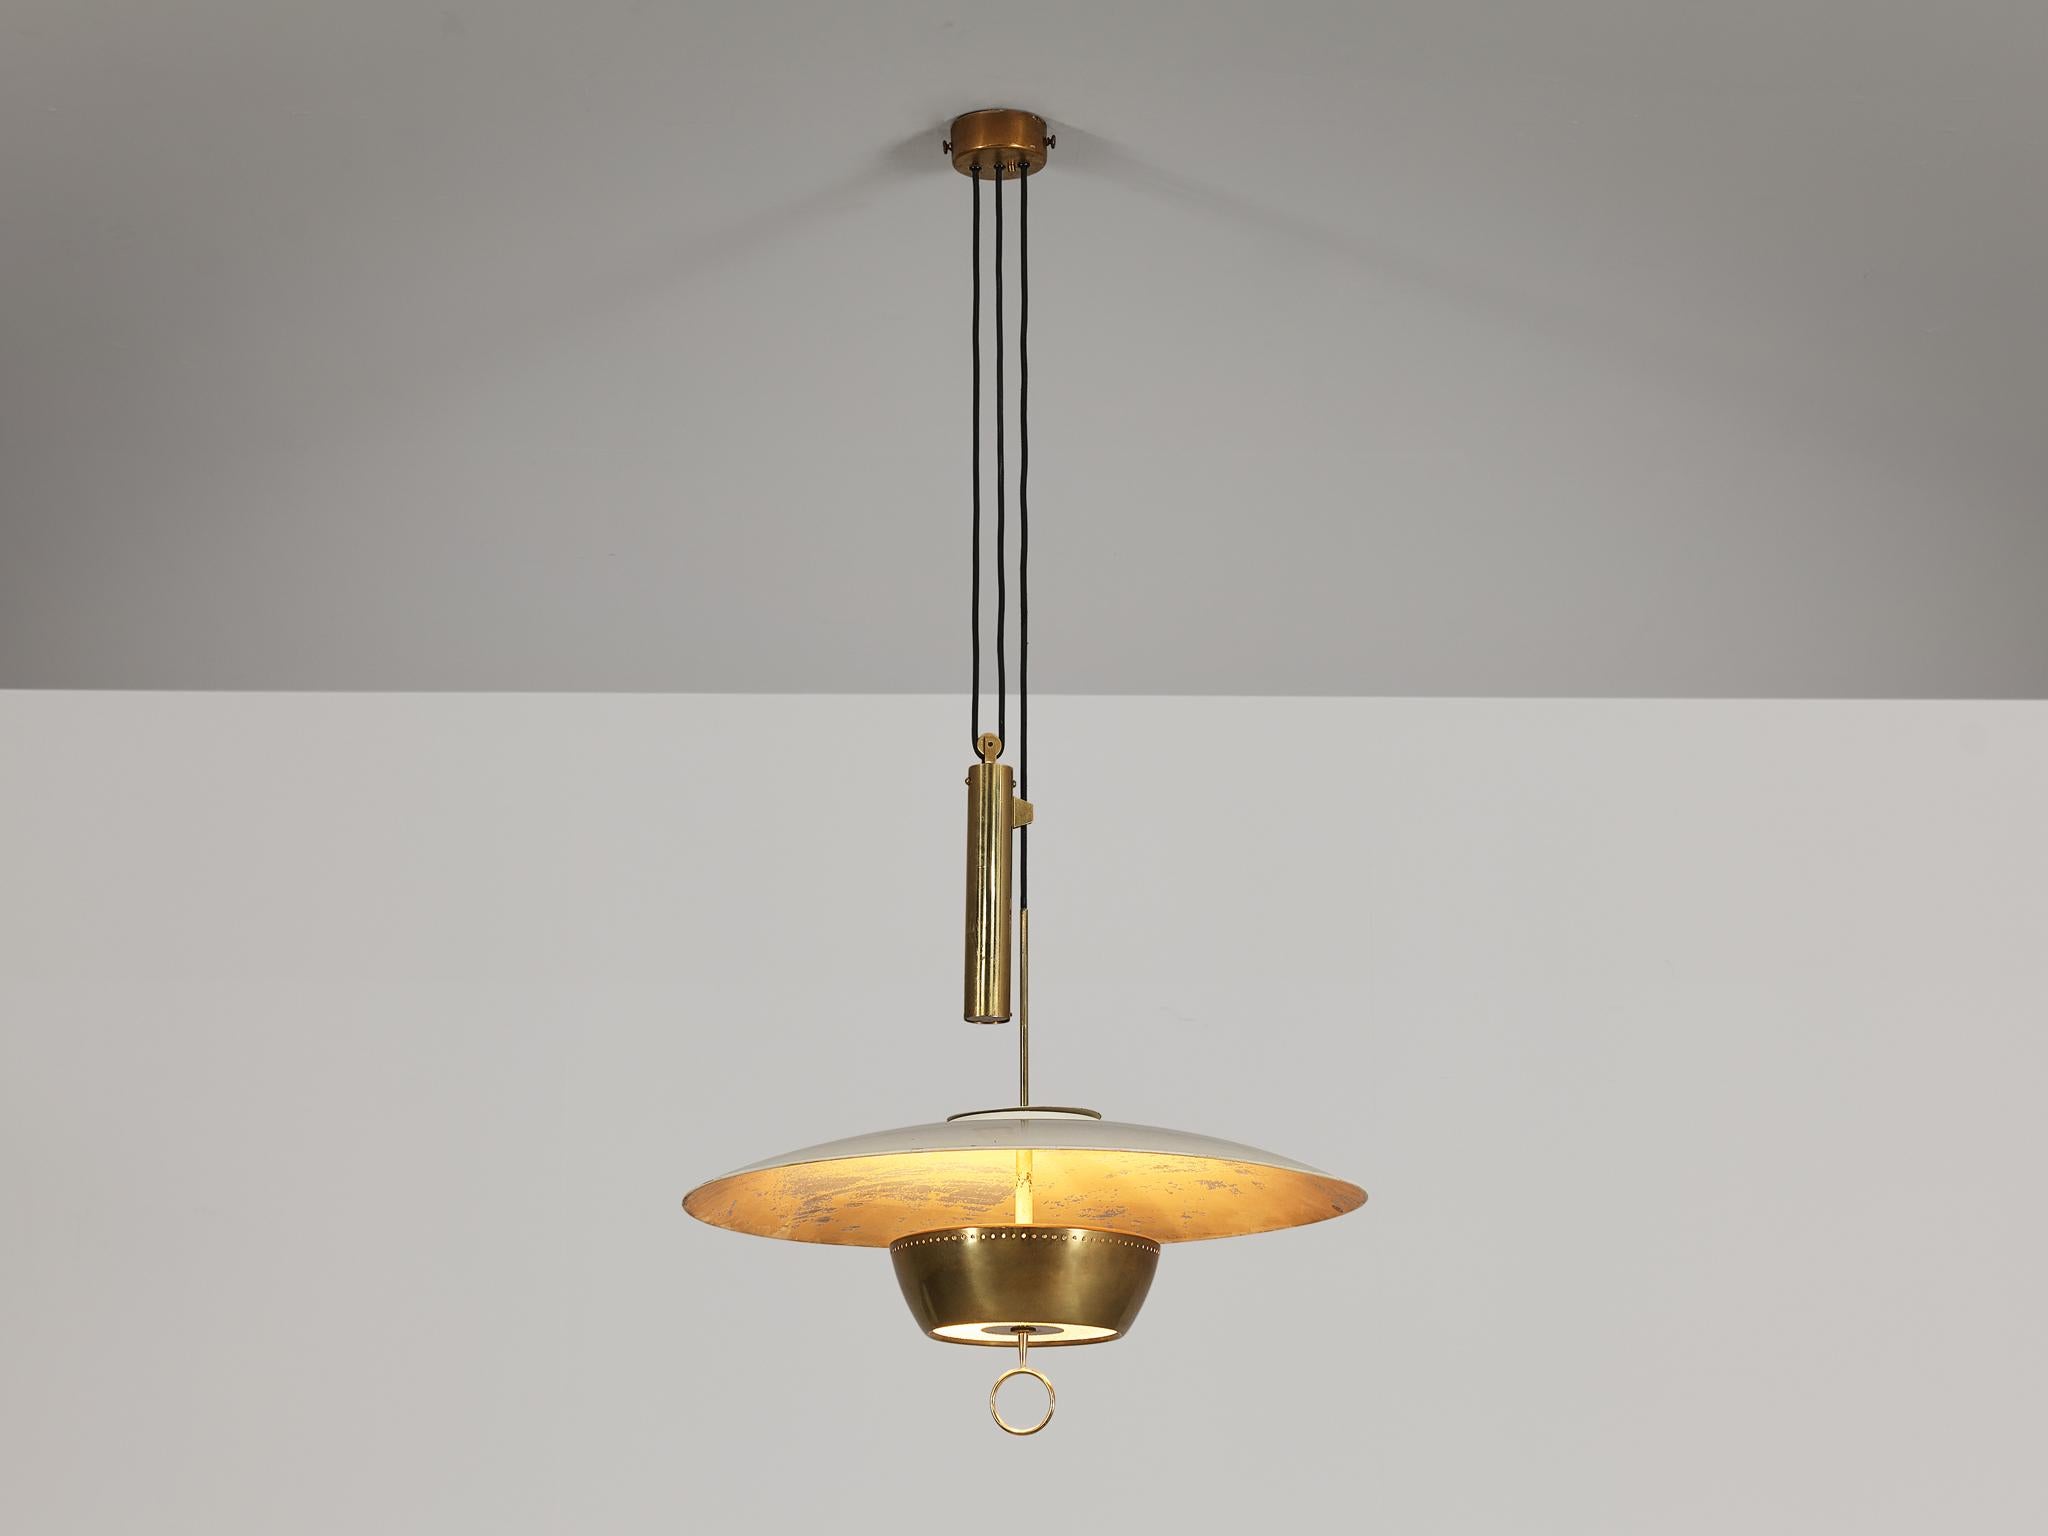 Gaetano Scolari for Stilnovo, ceiling light, model A5011, coated aluminum, brass, glass, Italy, 1950

Elegant, dynamic, and modern pendant created by Scolari for Stilnovo. This captivating pendant is adjustable in height, thanks to the presence of a